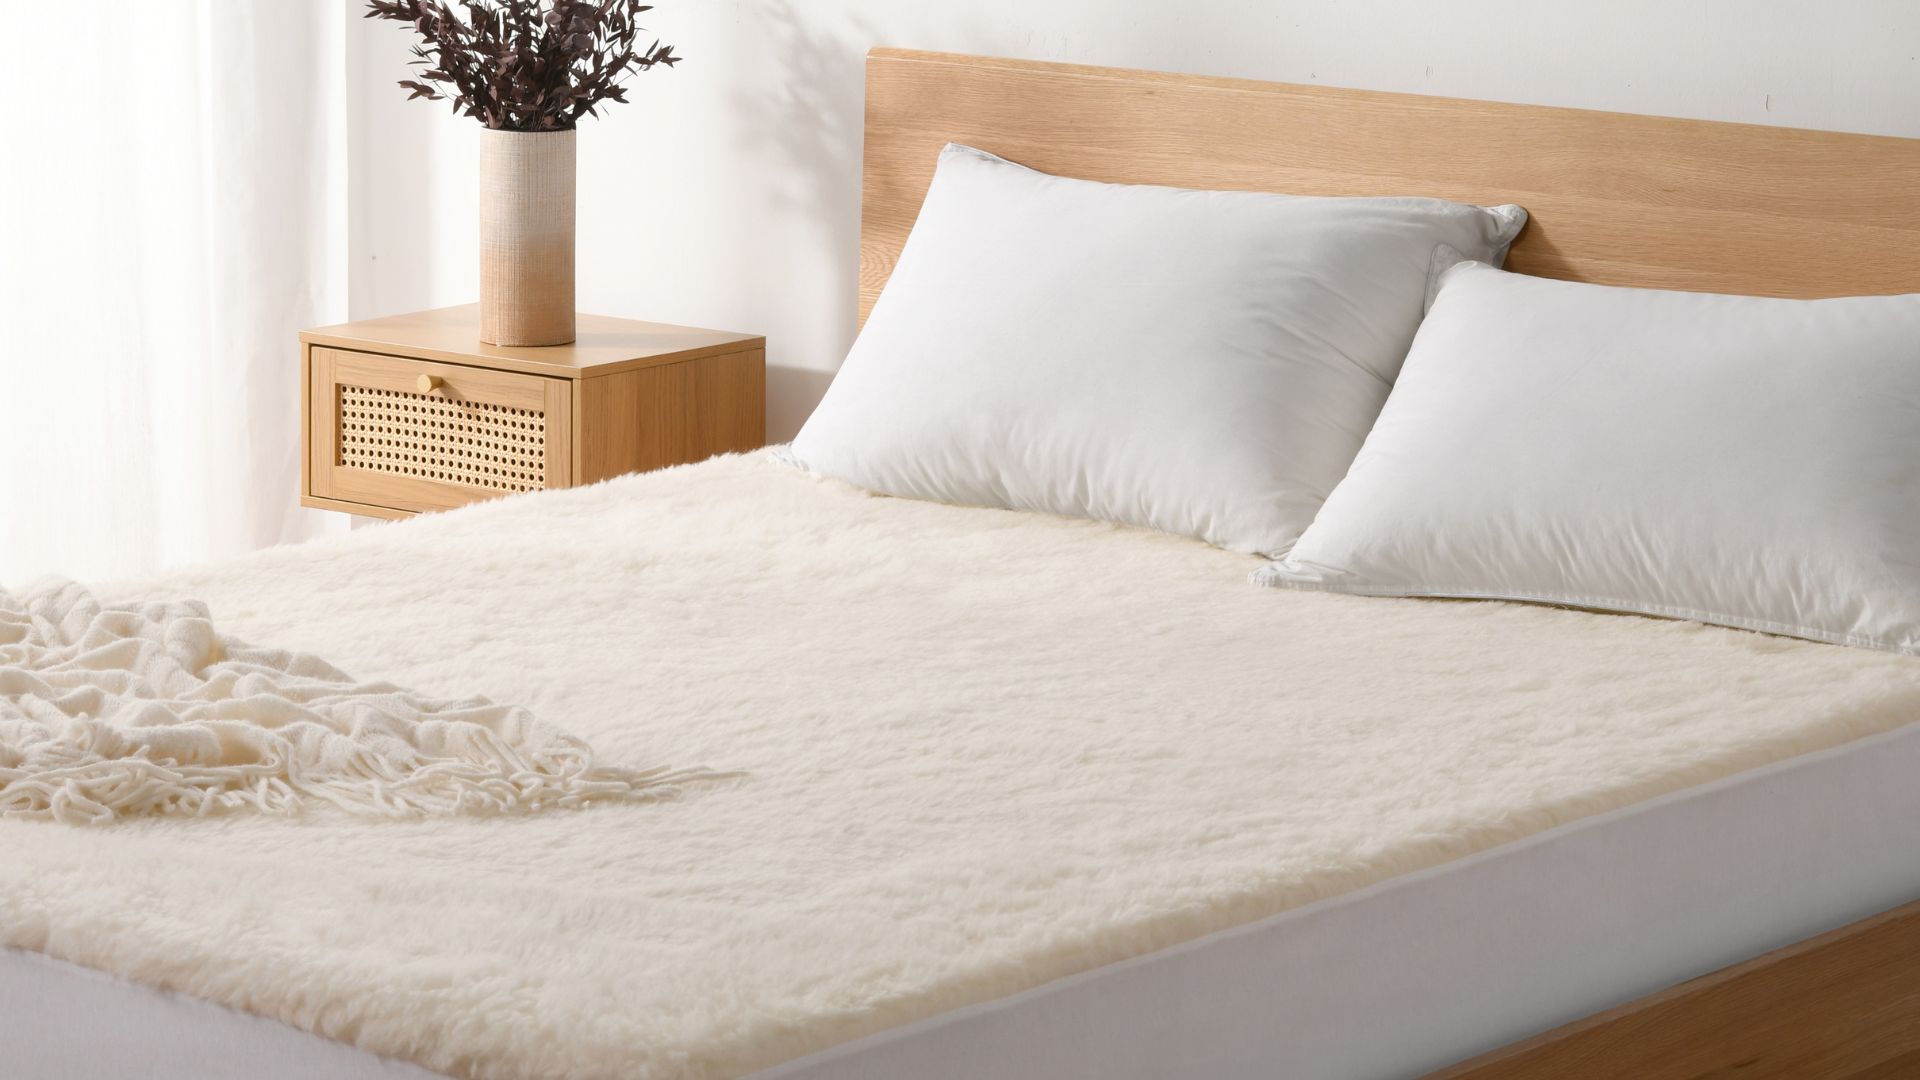 Ensure your bedding is best suited for your style of sleeping